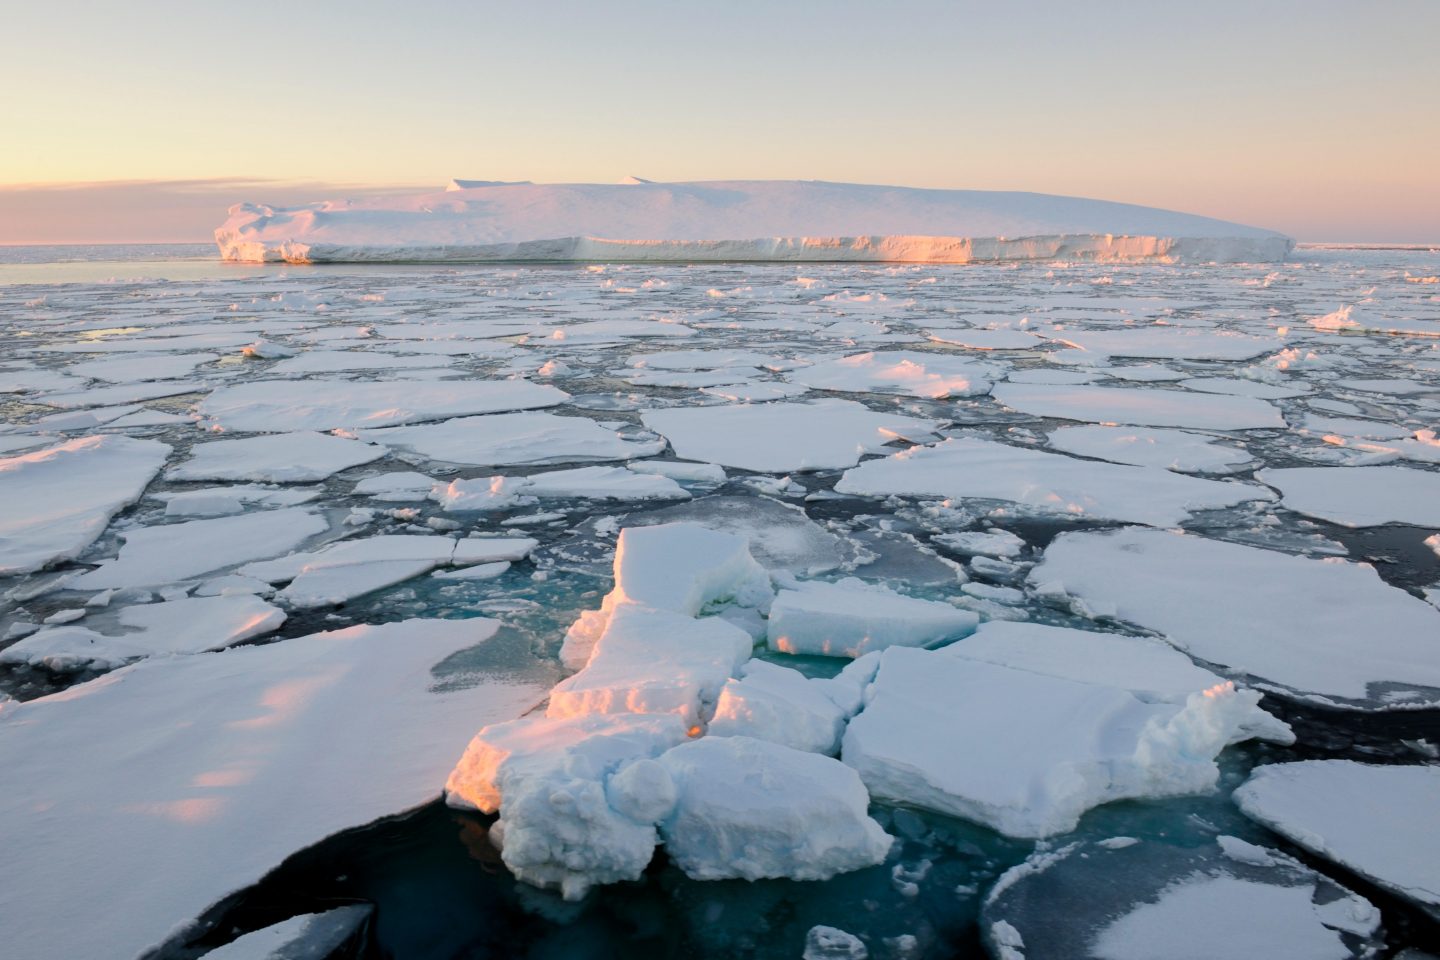 The pristine, frozen environment of the Ross Sea, protected by the world’s largest reserve since 2017 